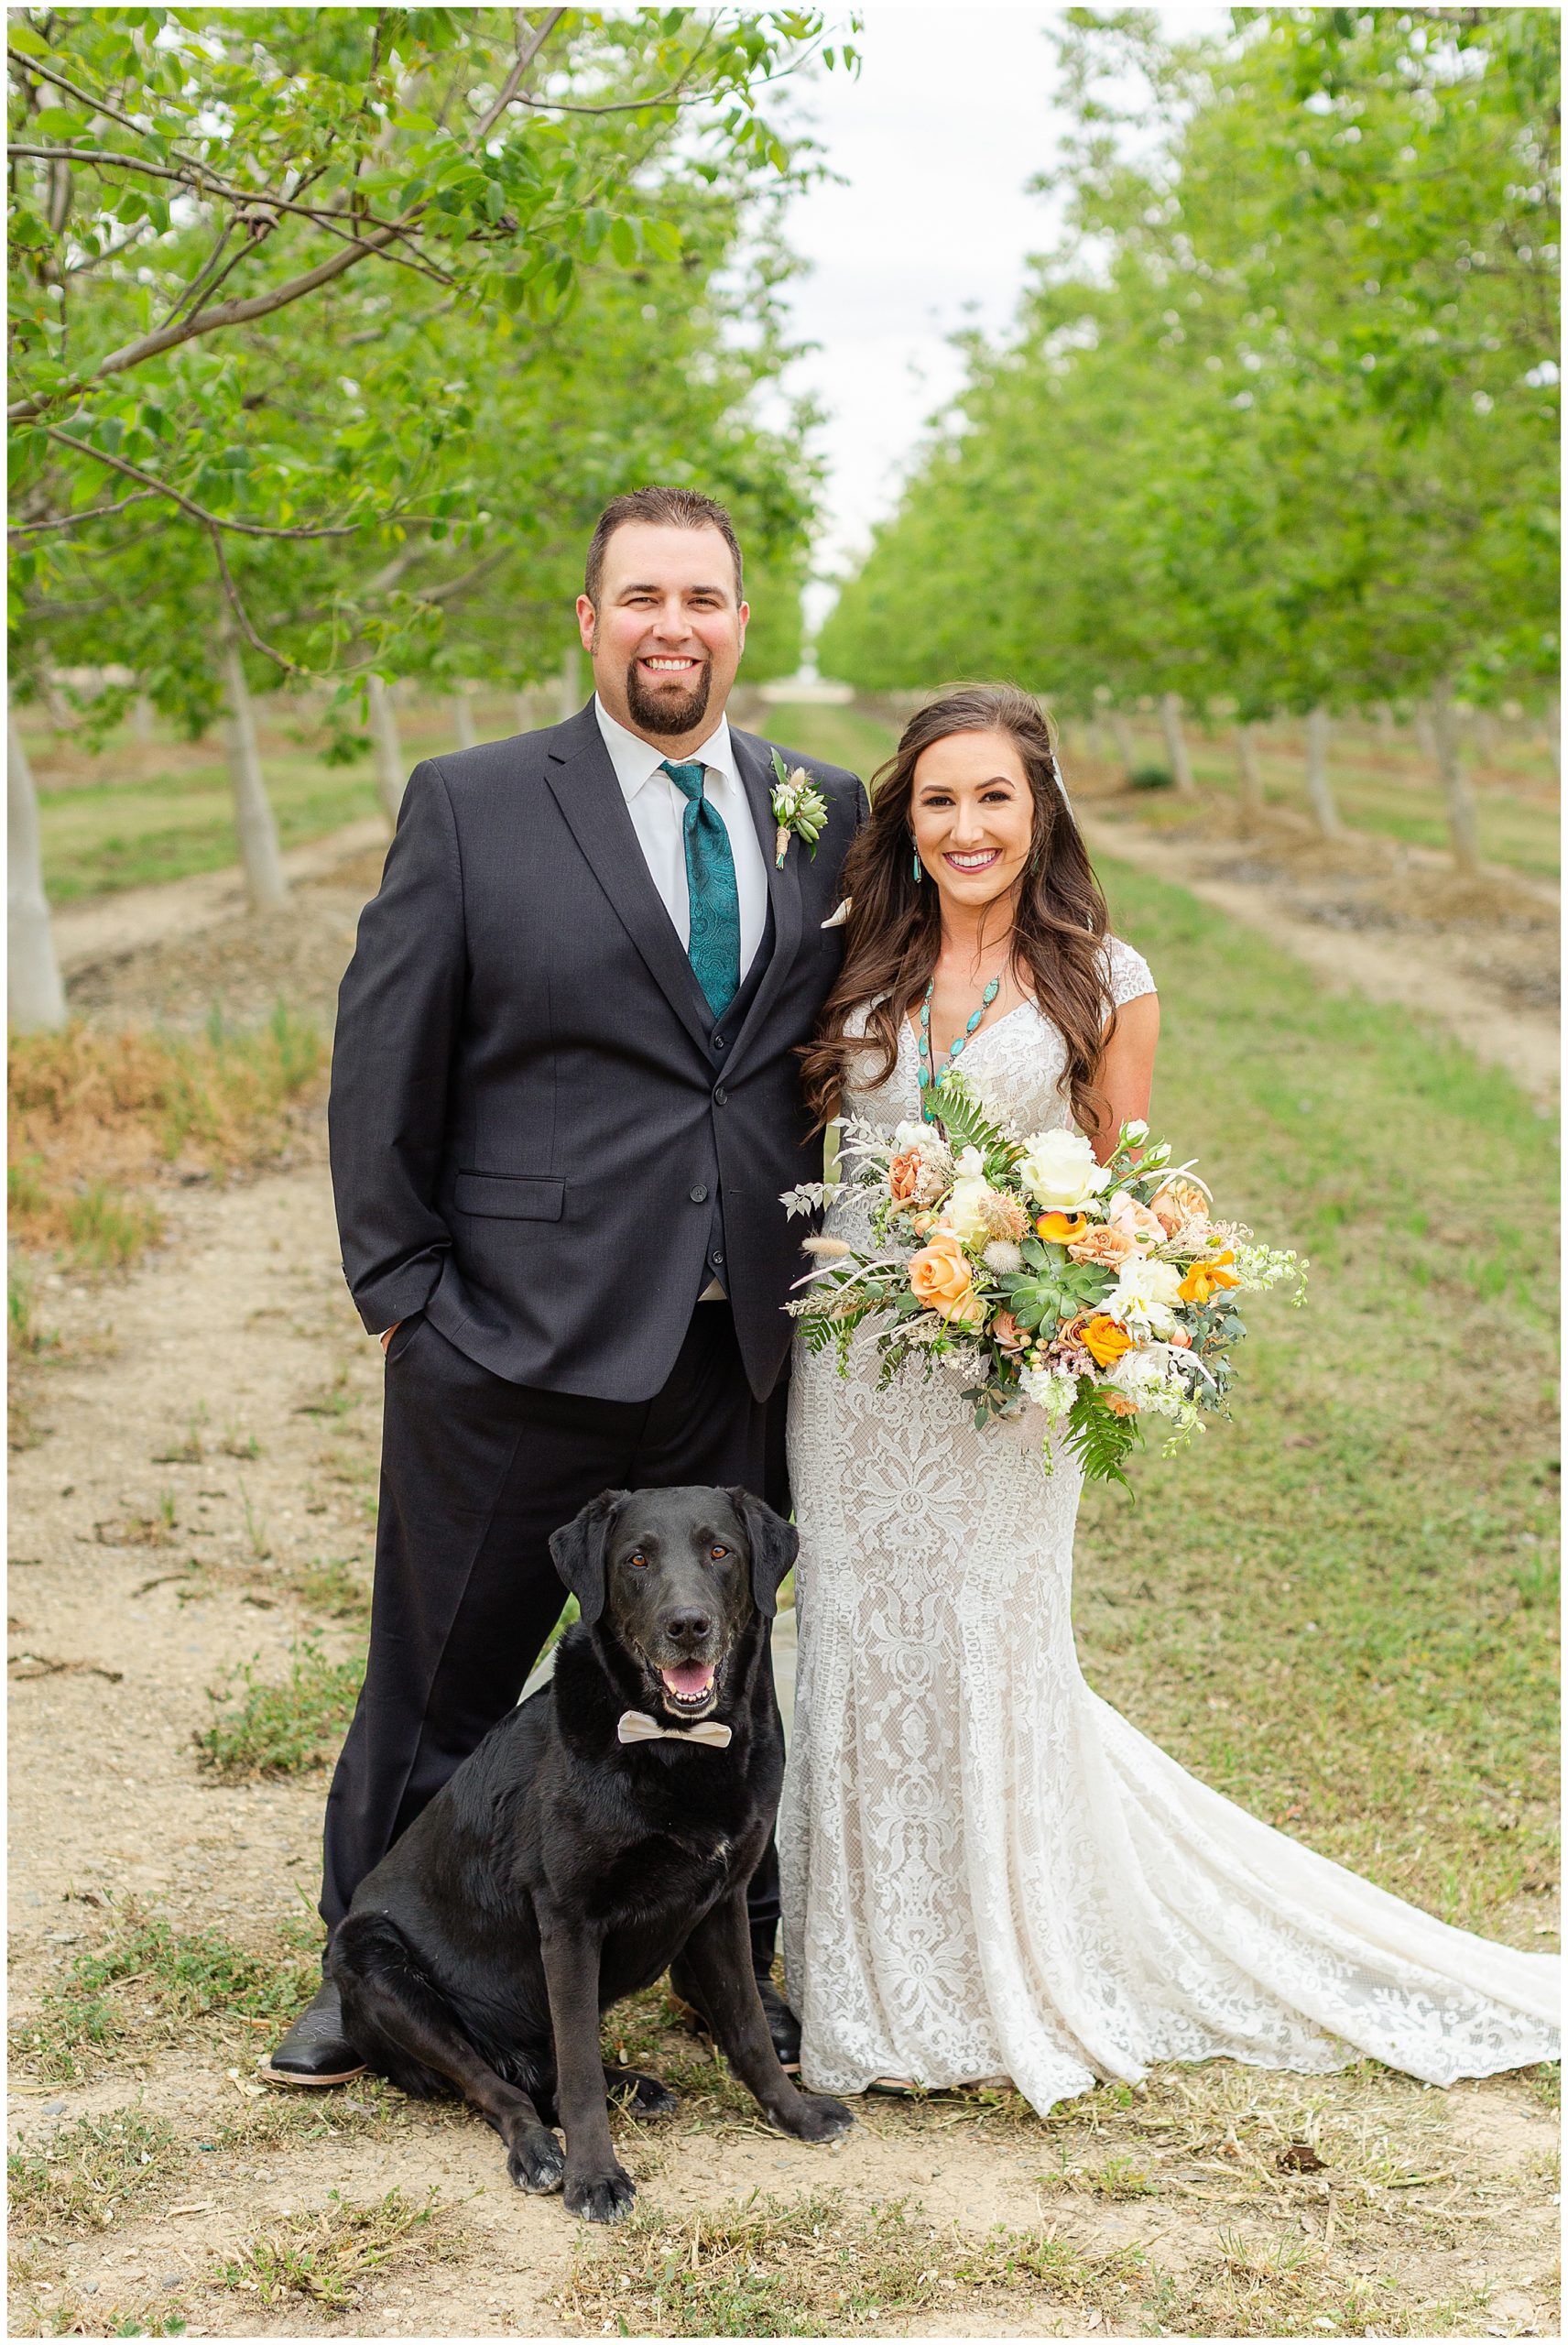 Husband and Wife Pictures in the Orchard with Dog | Mackenzie + Matt